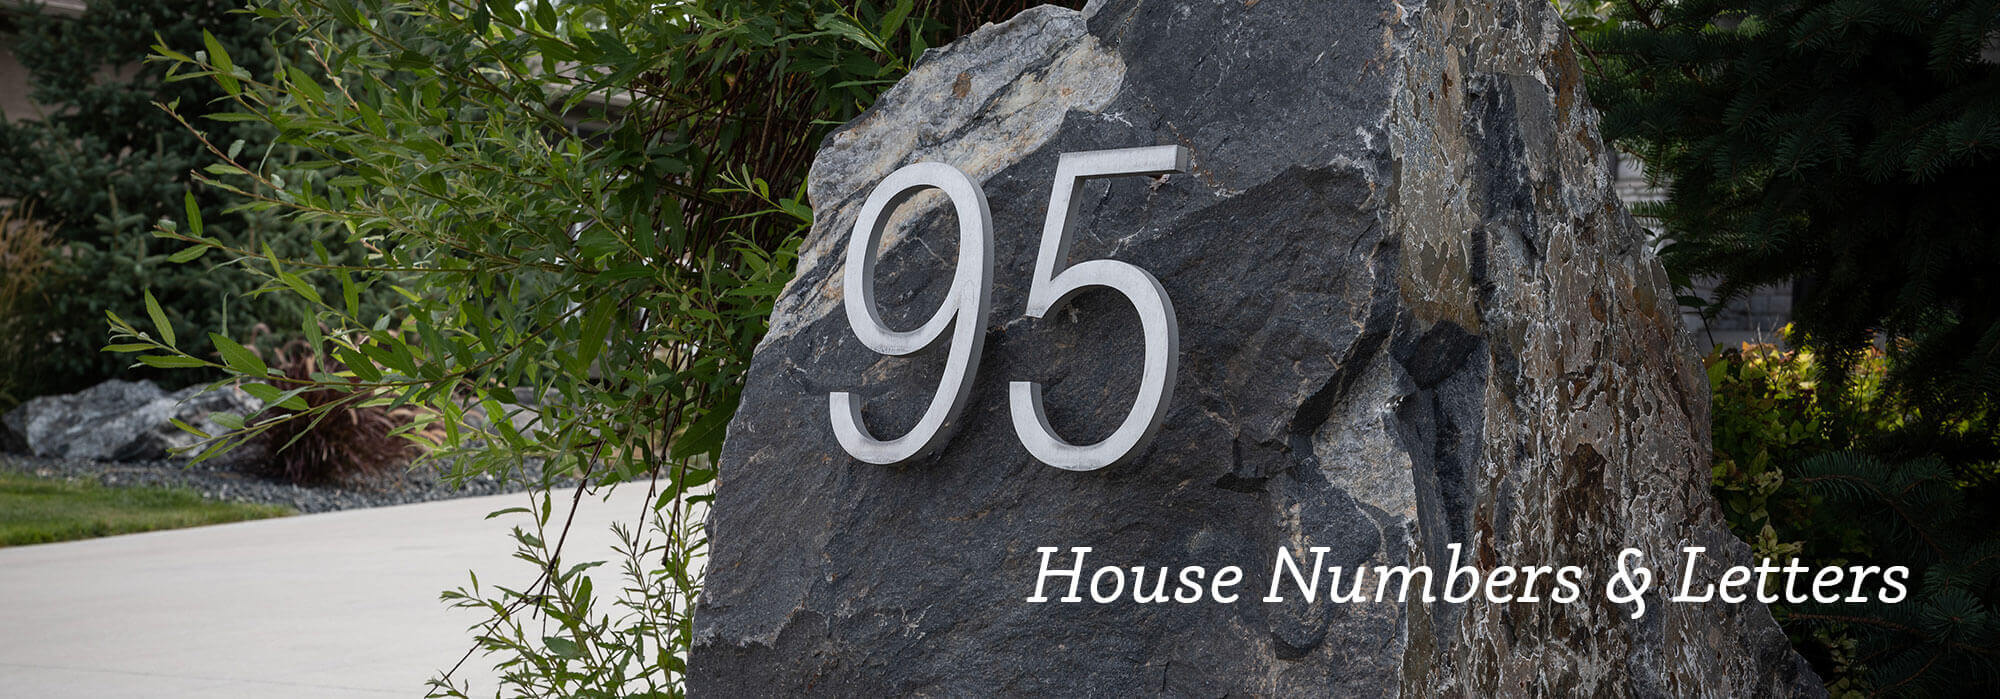 House Numbers & Letters